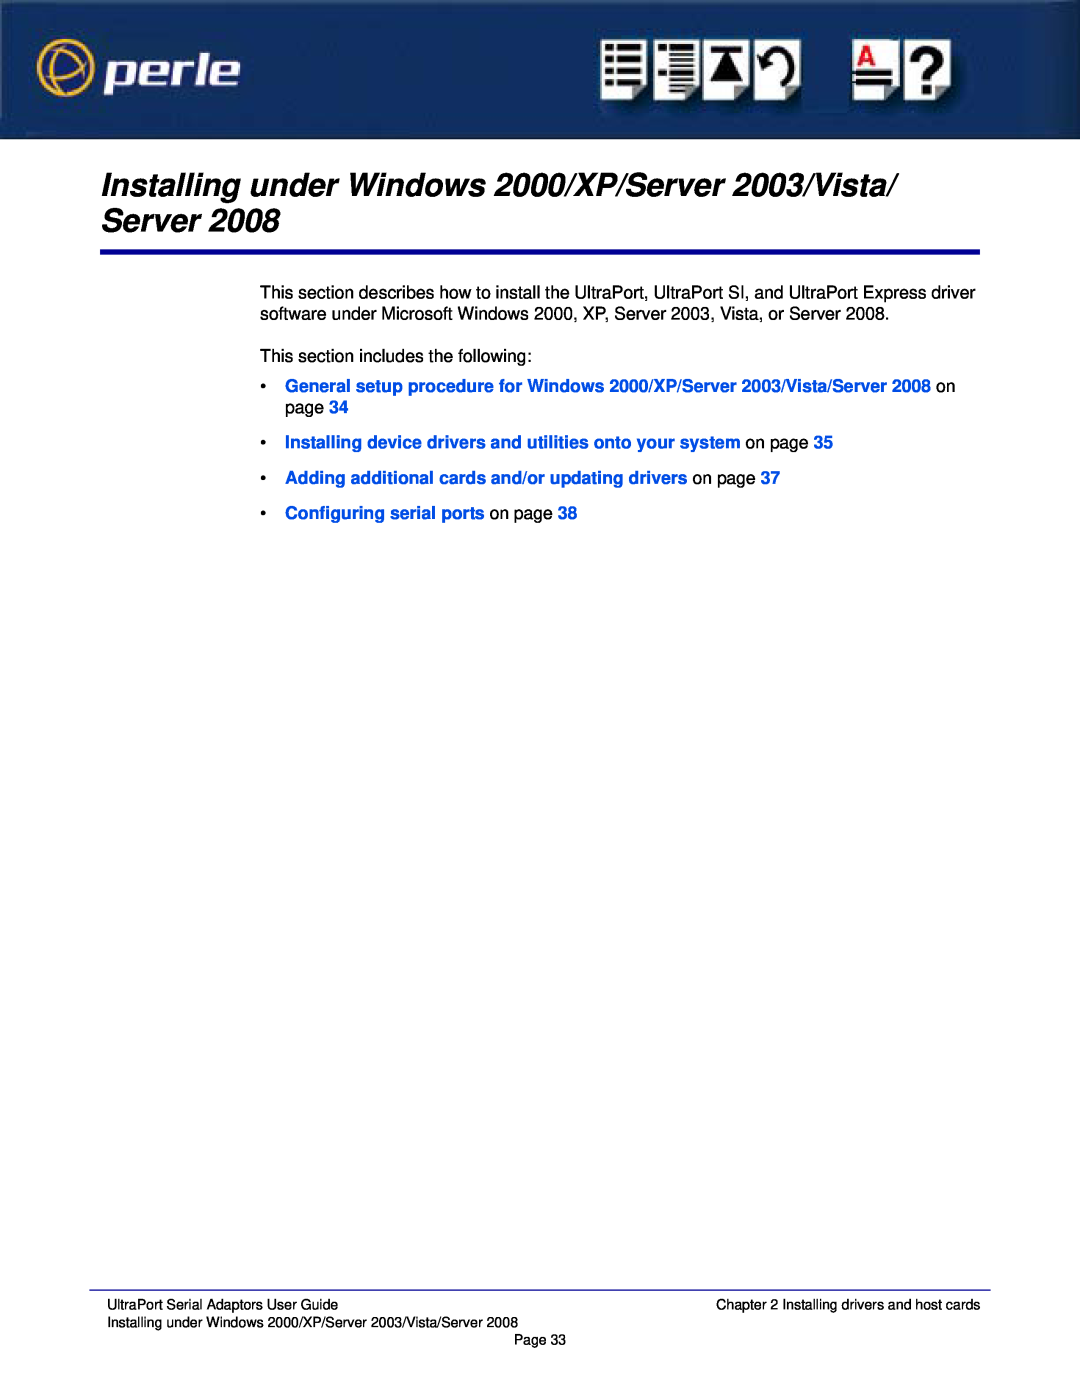 Perle Systems 5500152-23 Installing under Windows 2000/XP/Server 2003/Vista/ Server, Configuring serial ports on page 